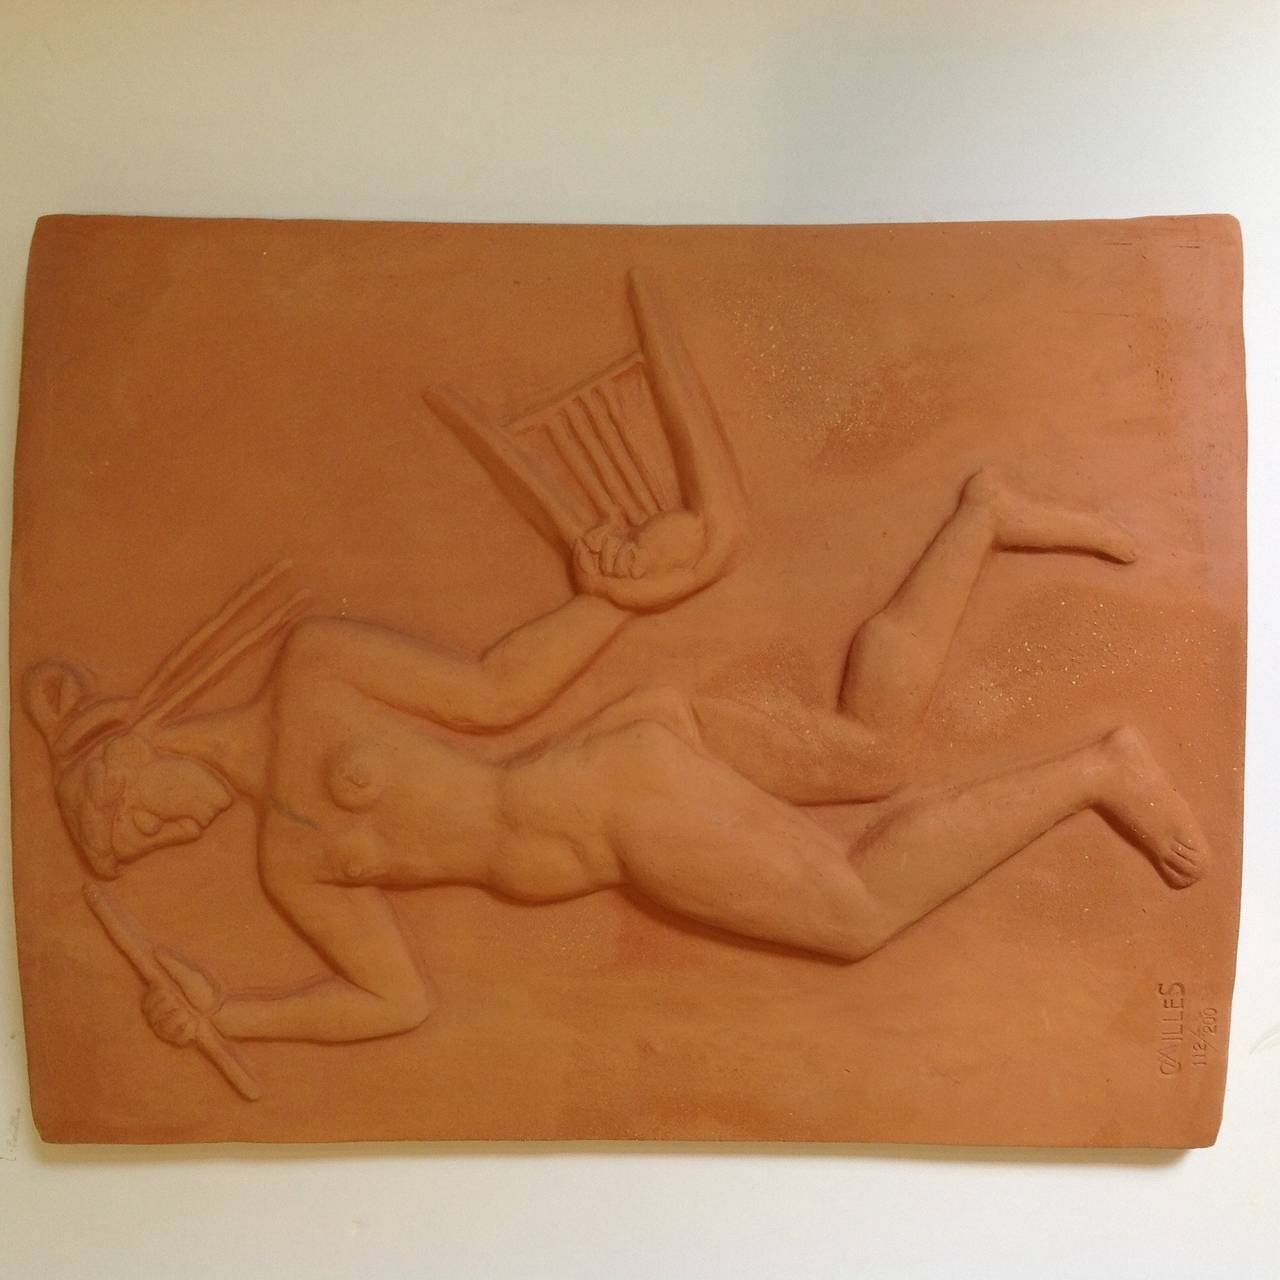 Terracotta plaque of a Terpsichore, a Muse by Swedish sculptor Carl Milles (1875- 1955).
It is signed C Milles 112/200. One of two from a Houston estate we are listing today. 
A graduate of the Sorbonne, and assistant to Rodin, Milles spent twenty